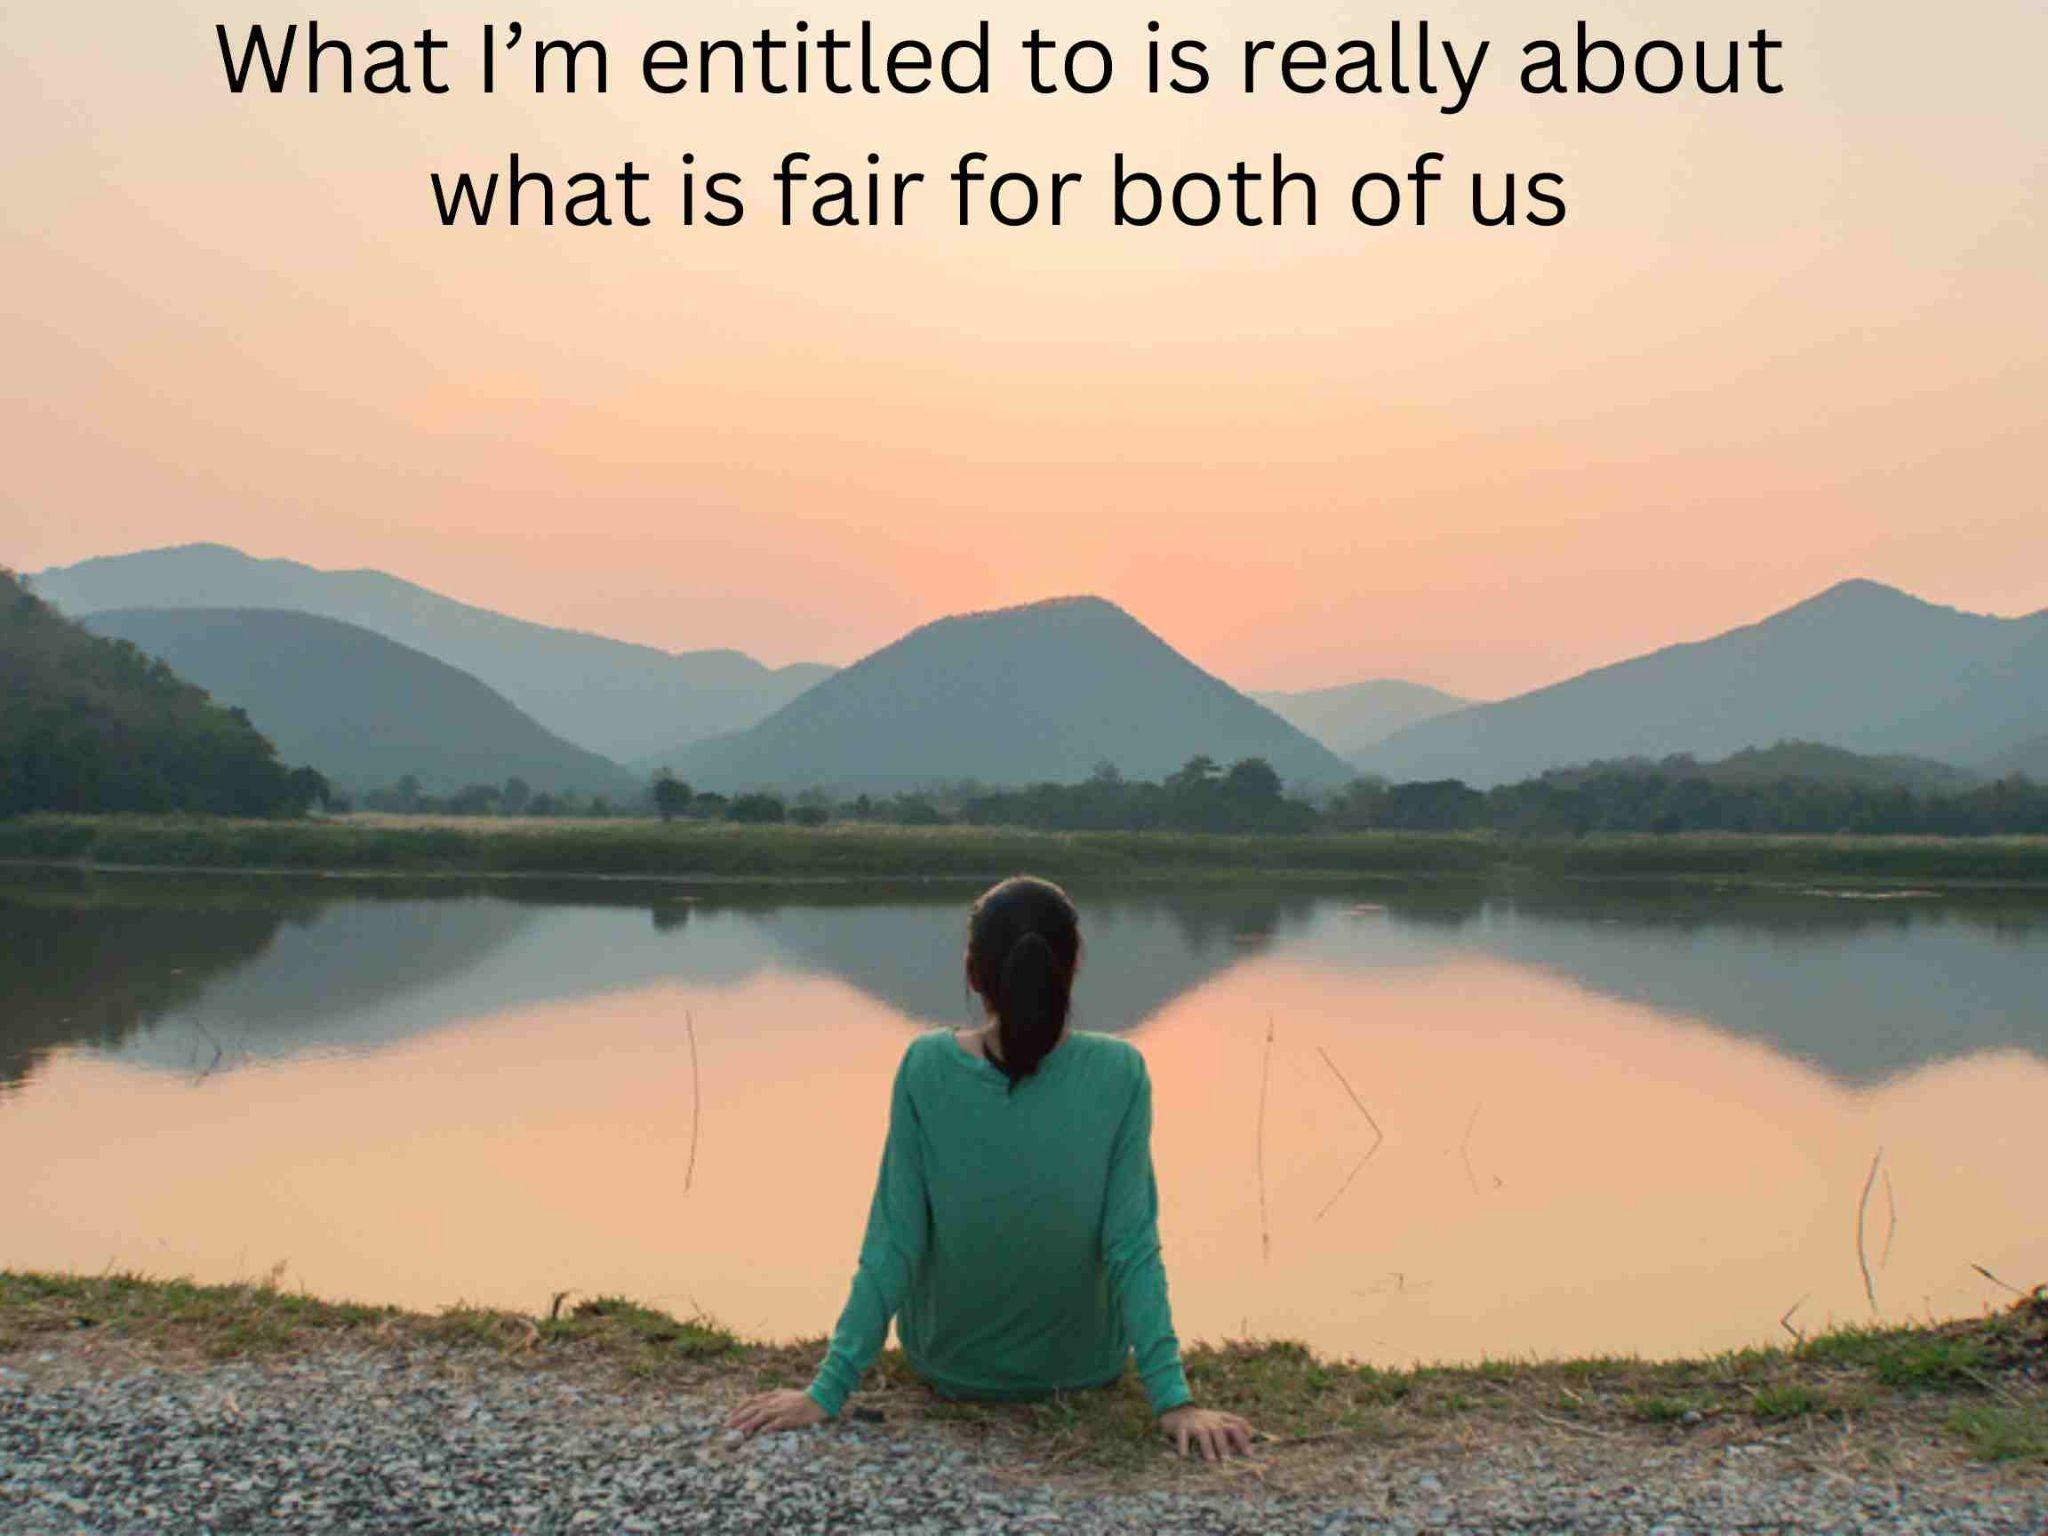 Person sitting by a tranquil lake with mountains in the background, contemplating key insights from a motivational quote overhead.